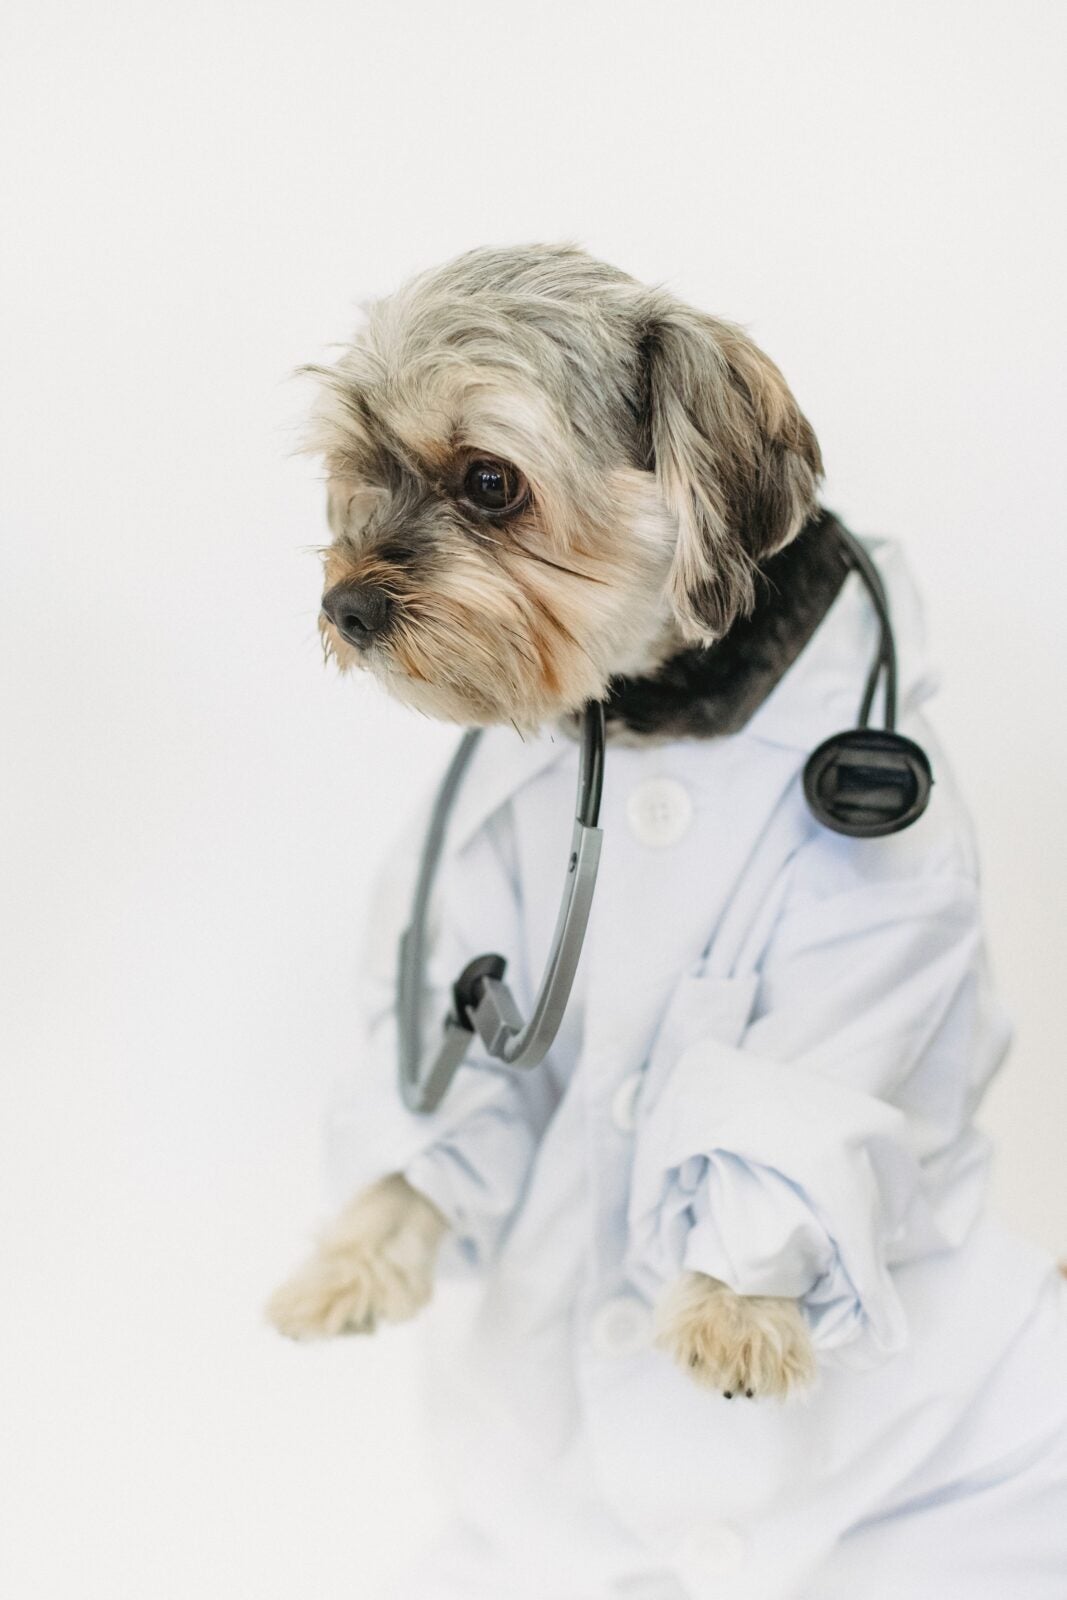 A dog wearing a doctor outfit.